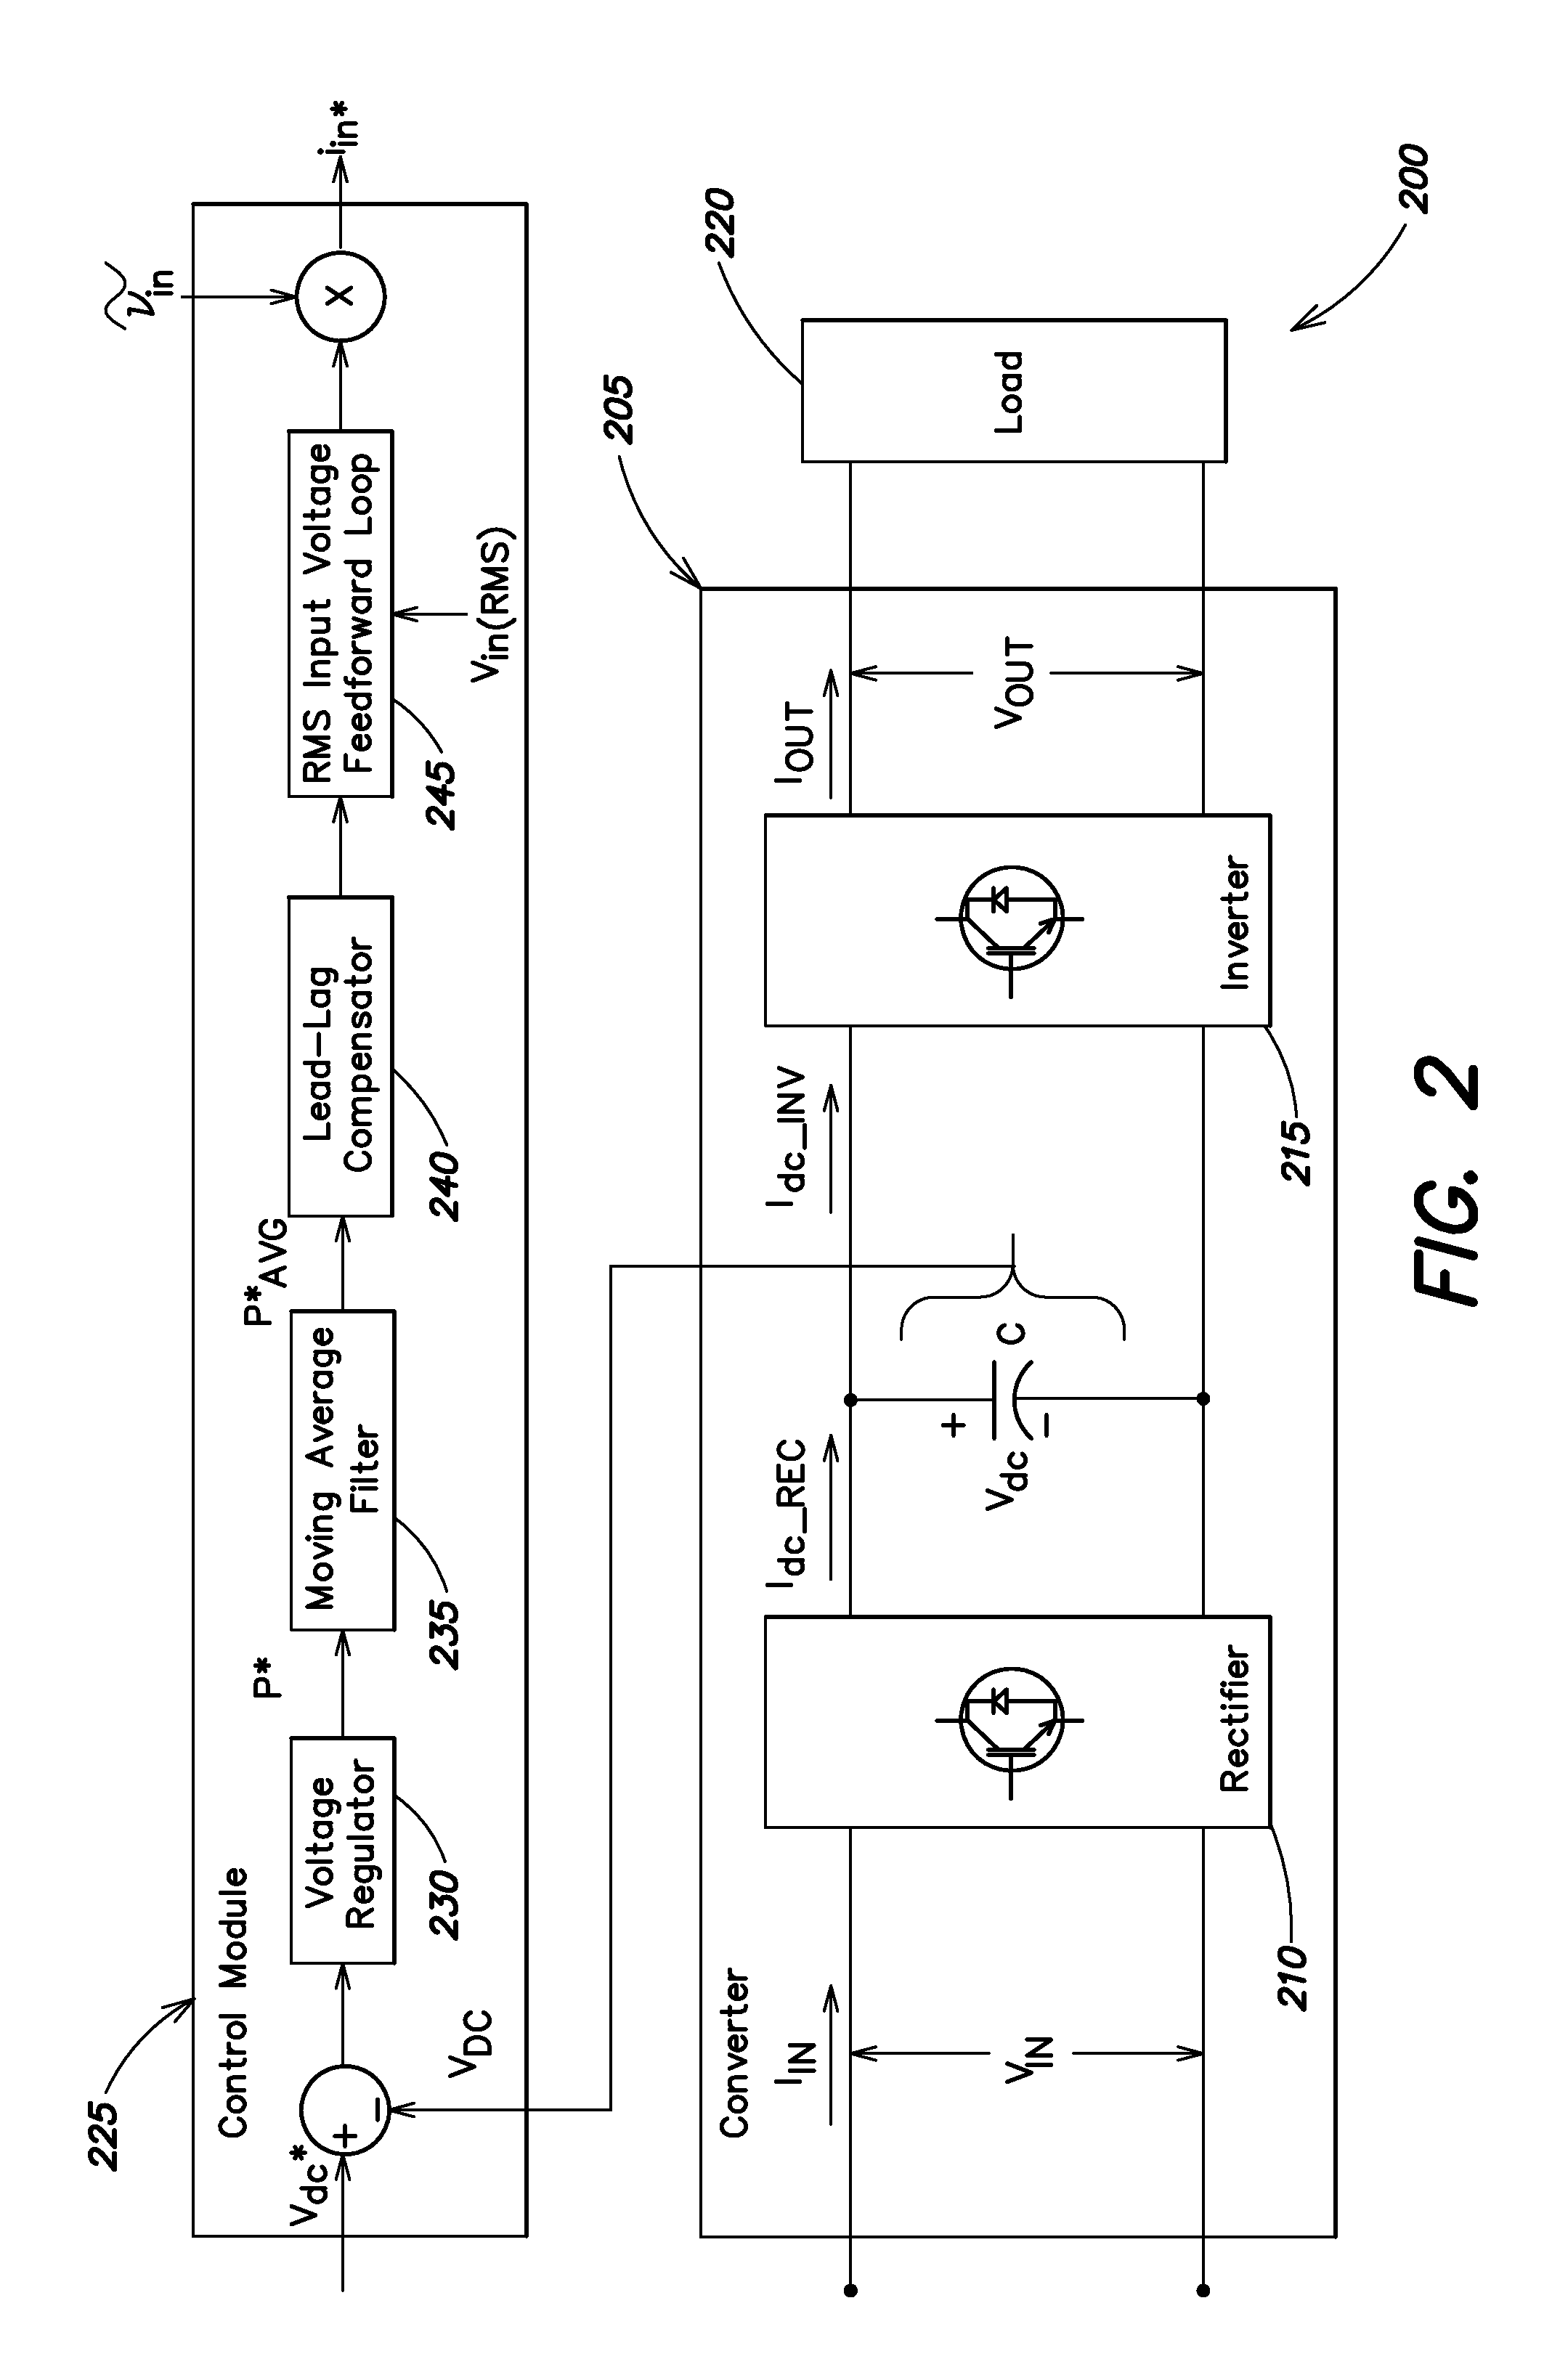 Ups frequency converter and line conditioner